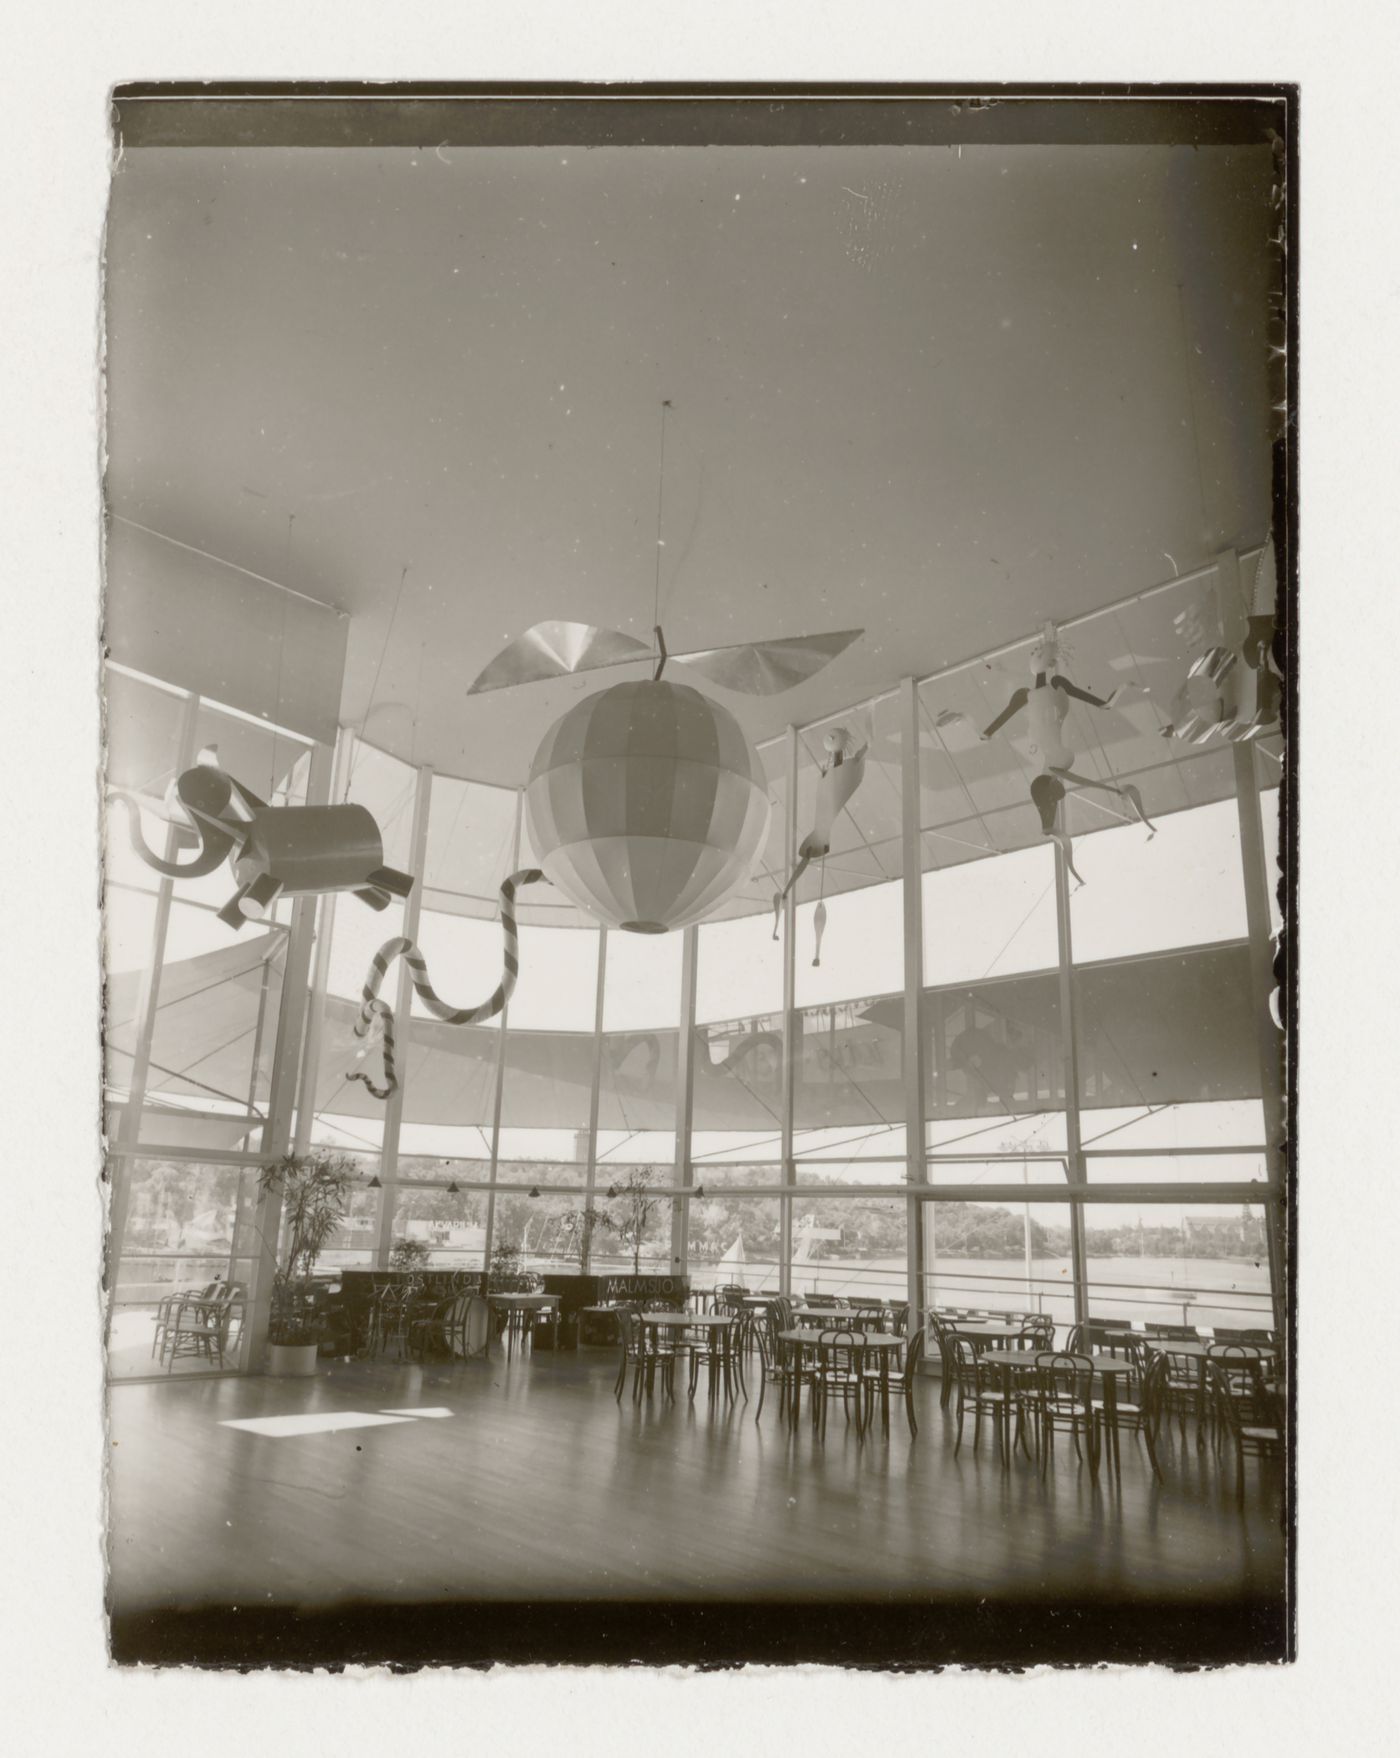 Interior view of Paradise Restaurant dance hall at the Stockholm Exhibition of 1930 showing ceiling ornaments, tables and chairs, Stockholm